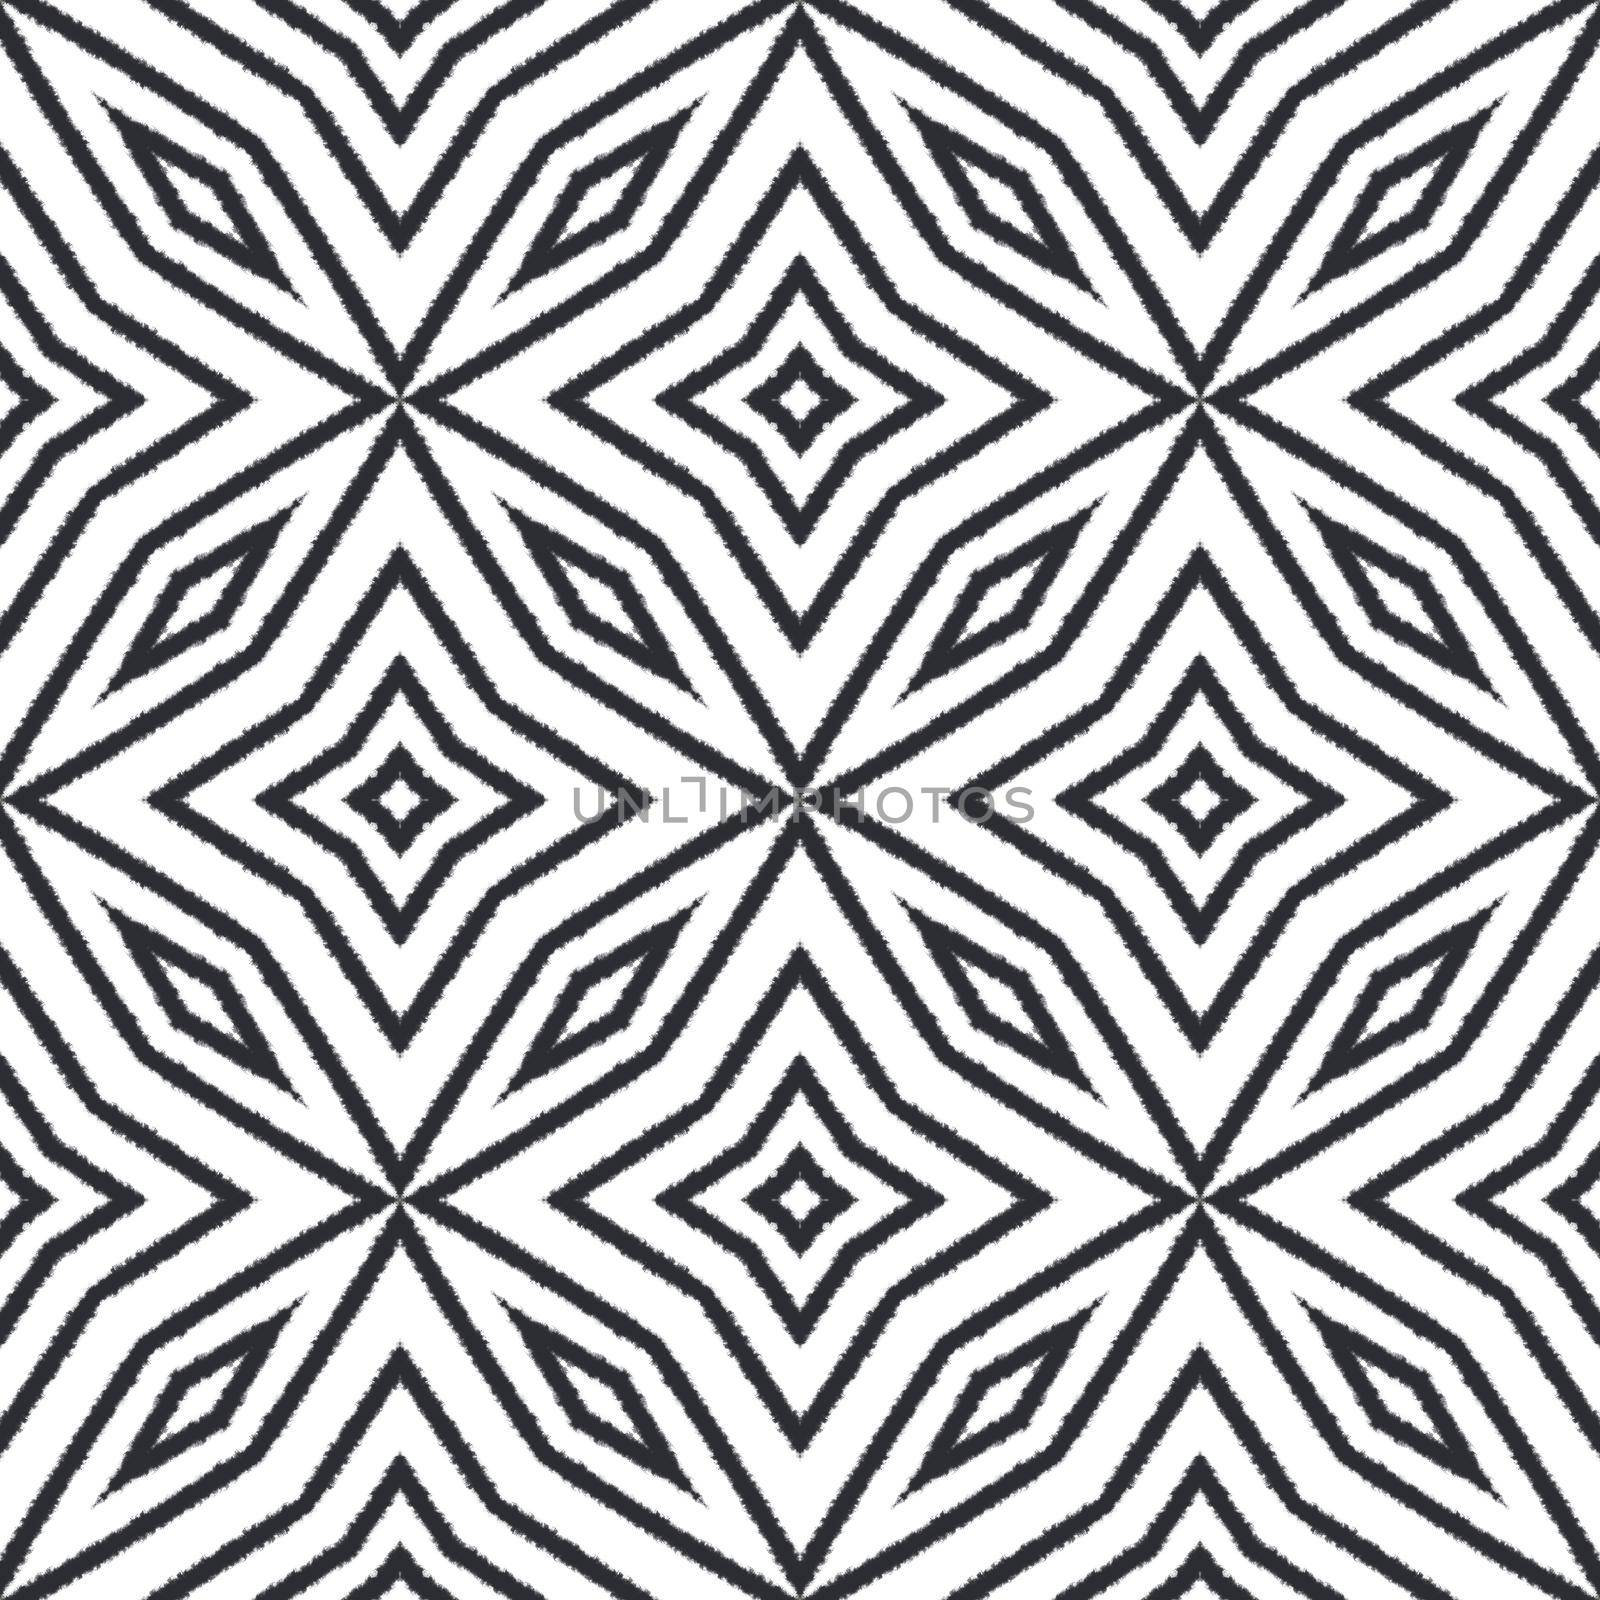 Striped hand drawn pattern. Black symmetrical kaleidoscope background. Repeating striped hand drawn tile. Textile ready cute print, swimwear fabric, wallpaper, wrapping.